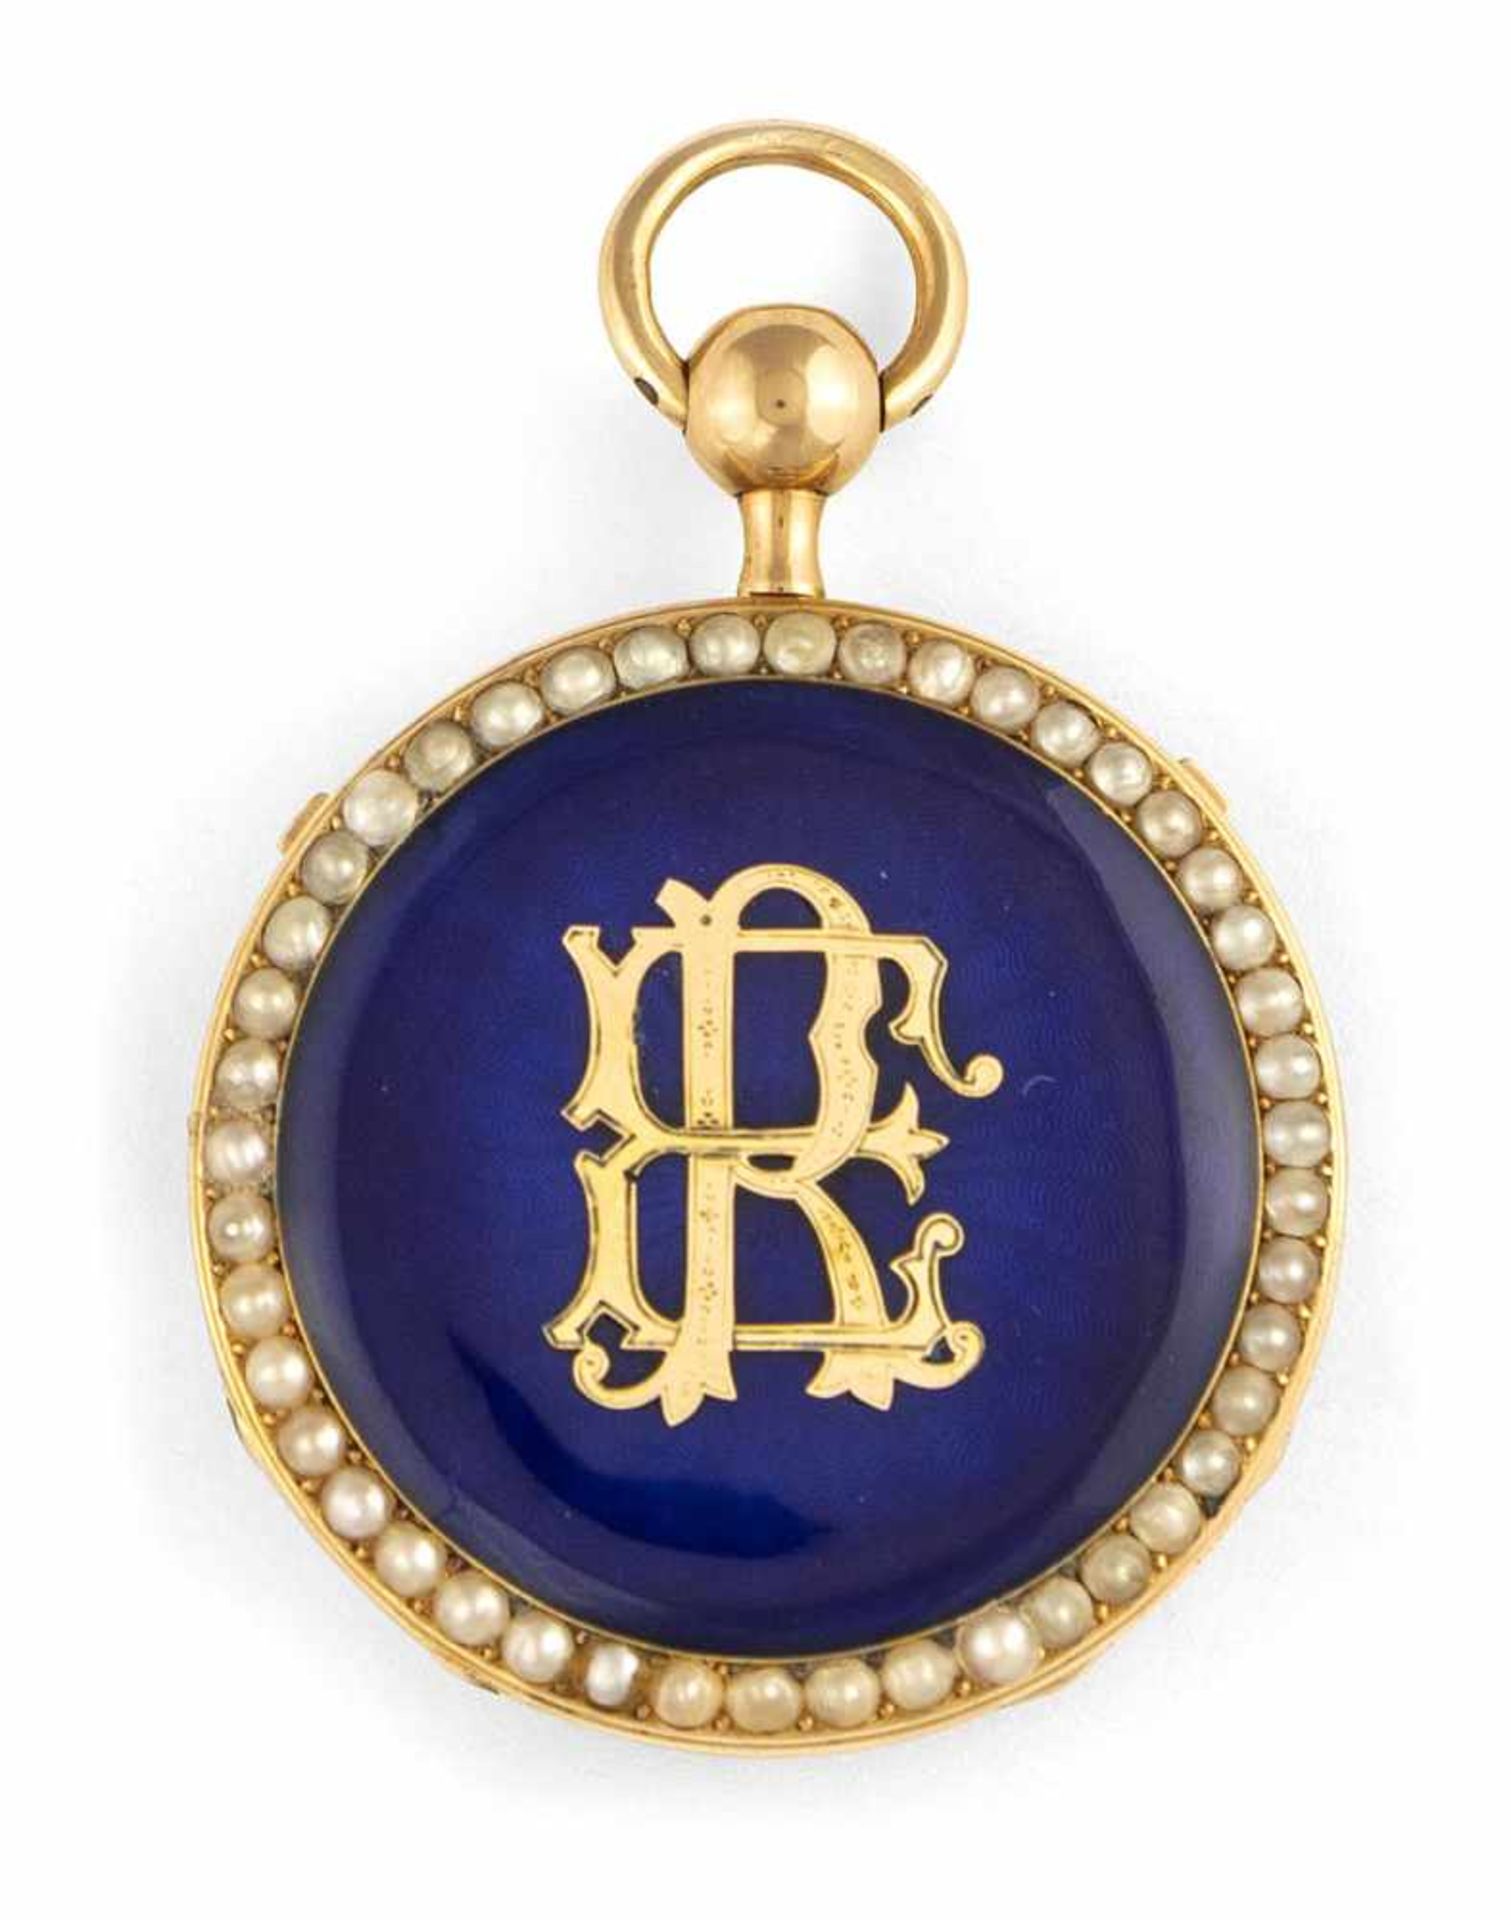 A fine 18ct gold ladies pocket watch, France, c. 1820. Enamel and pearl decorated case. - Image 3 of 4